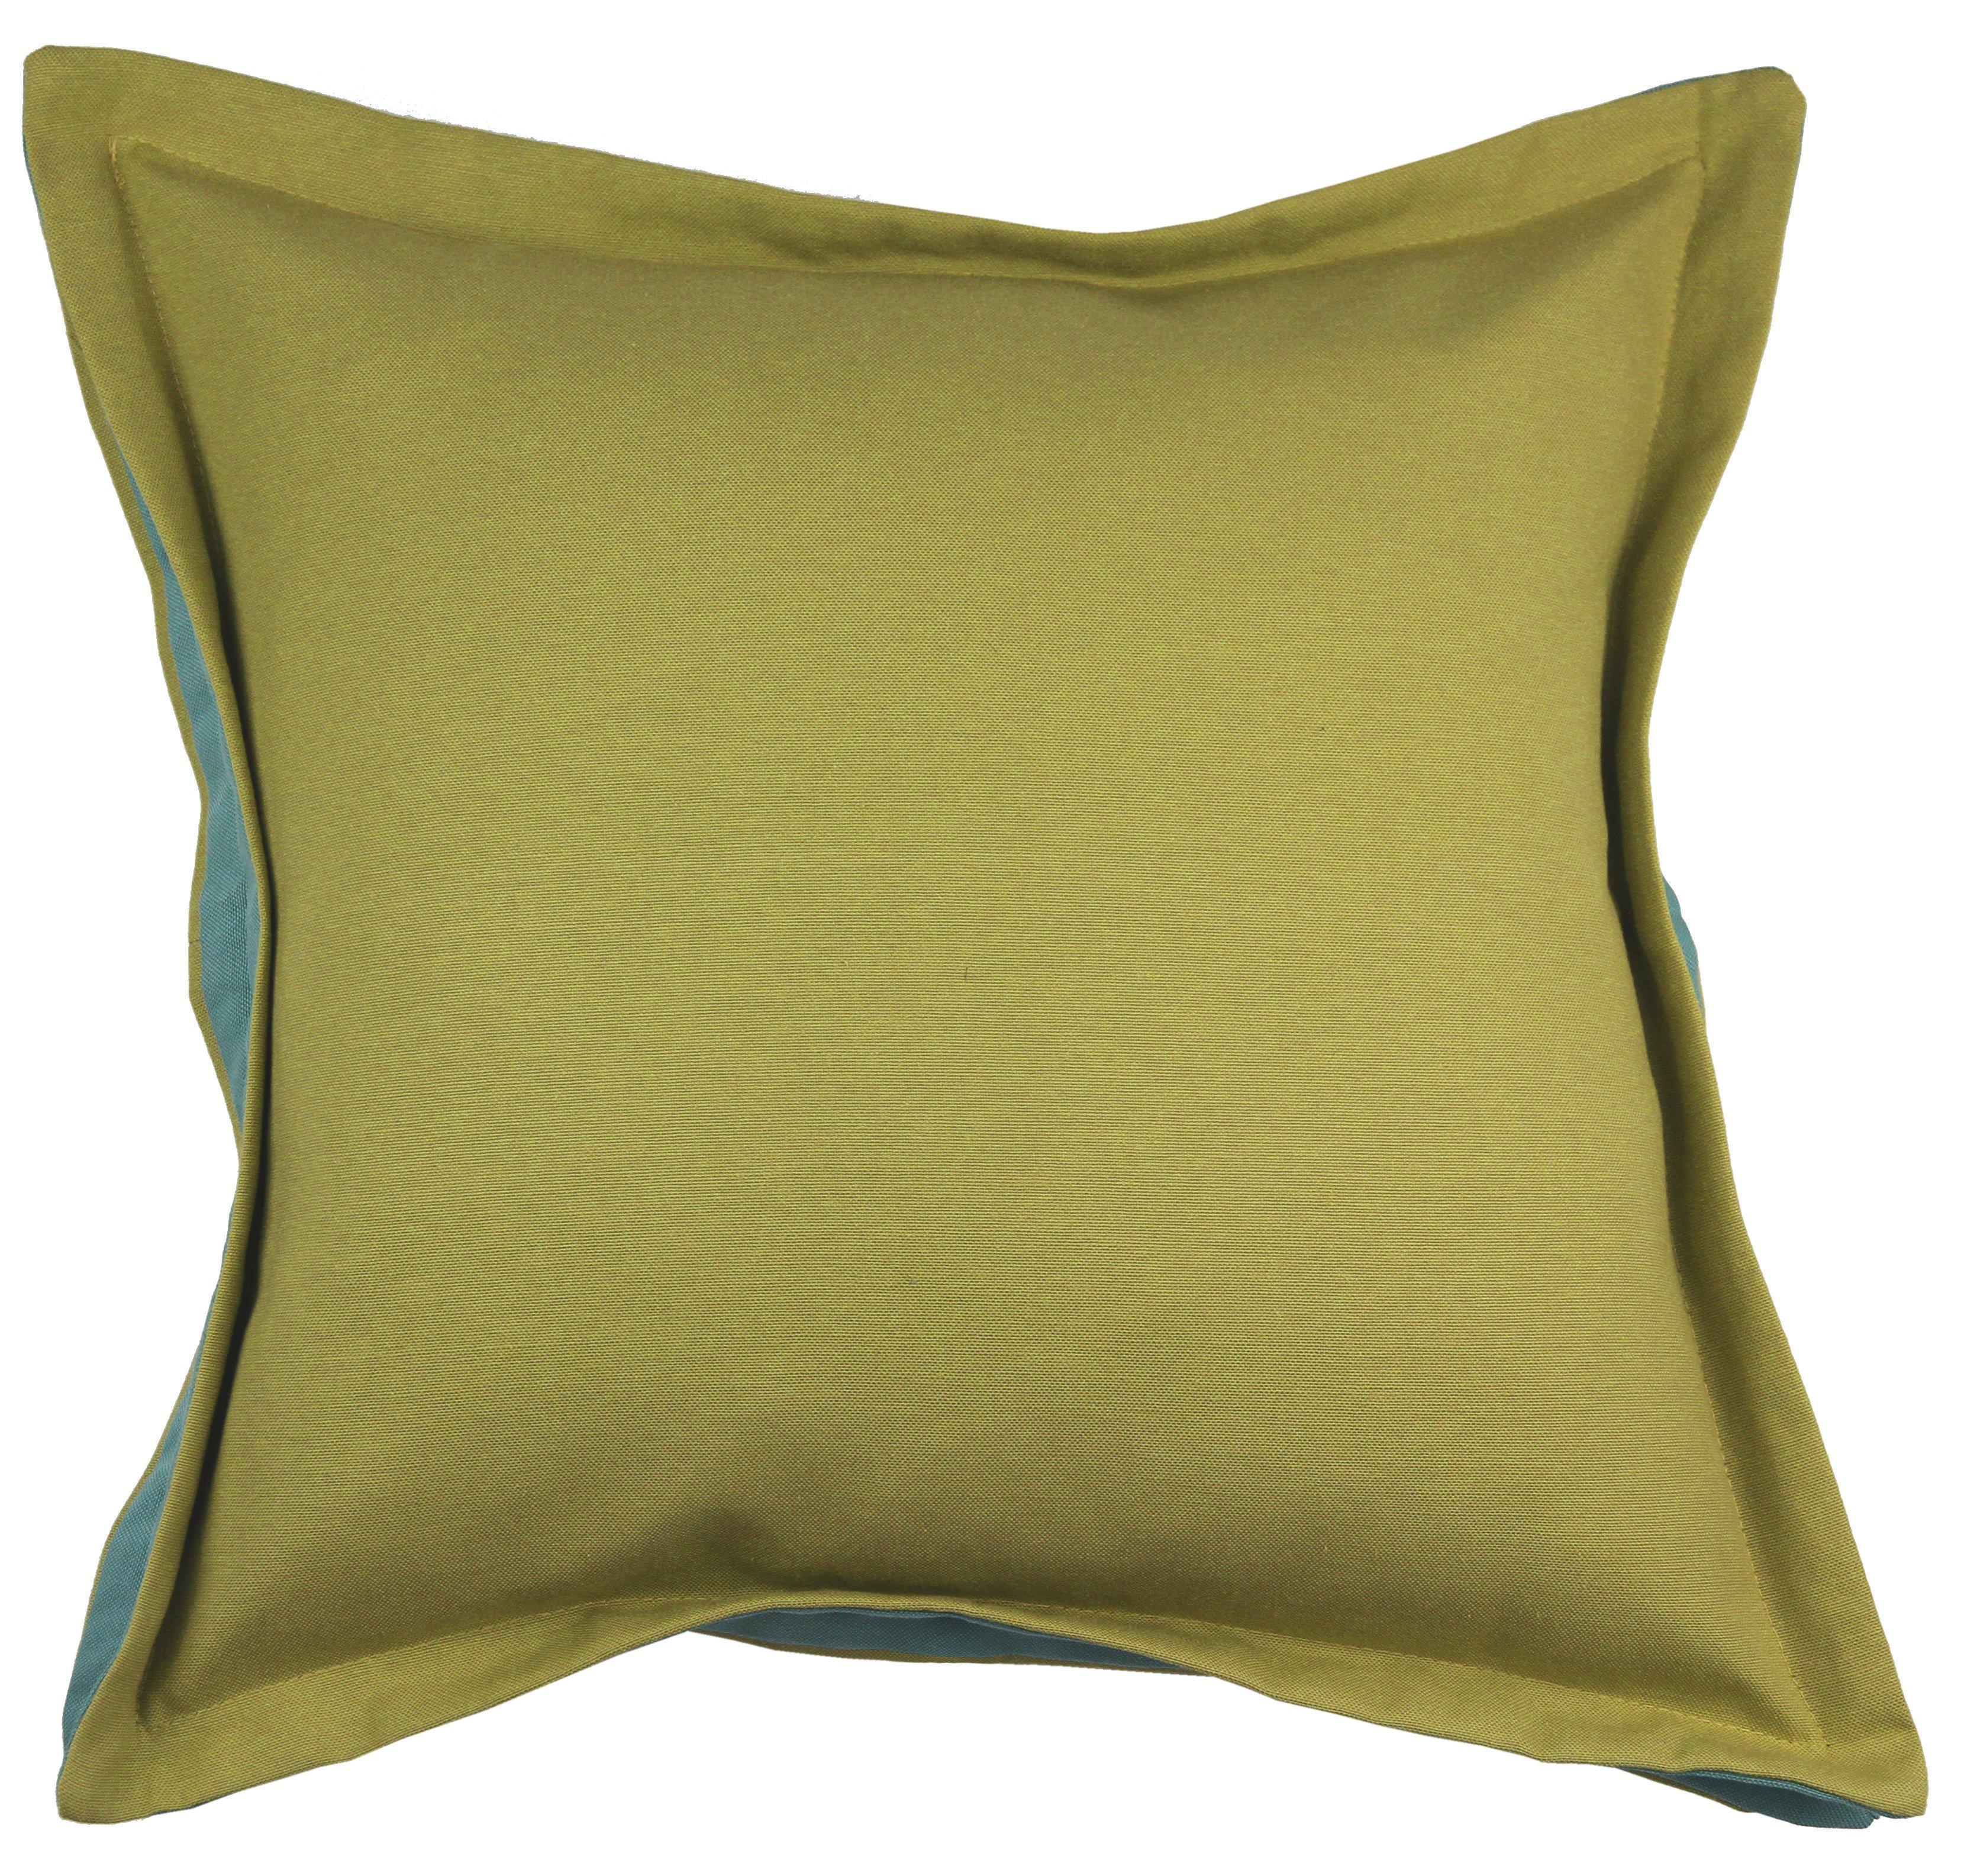 McAlister Textiles Panama Accent Lime Green + Teal Cushion Cushions and Covers Cover Only 43cm x 43cm 